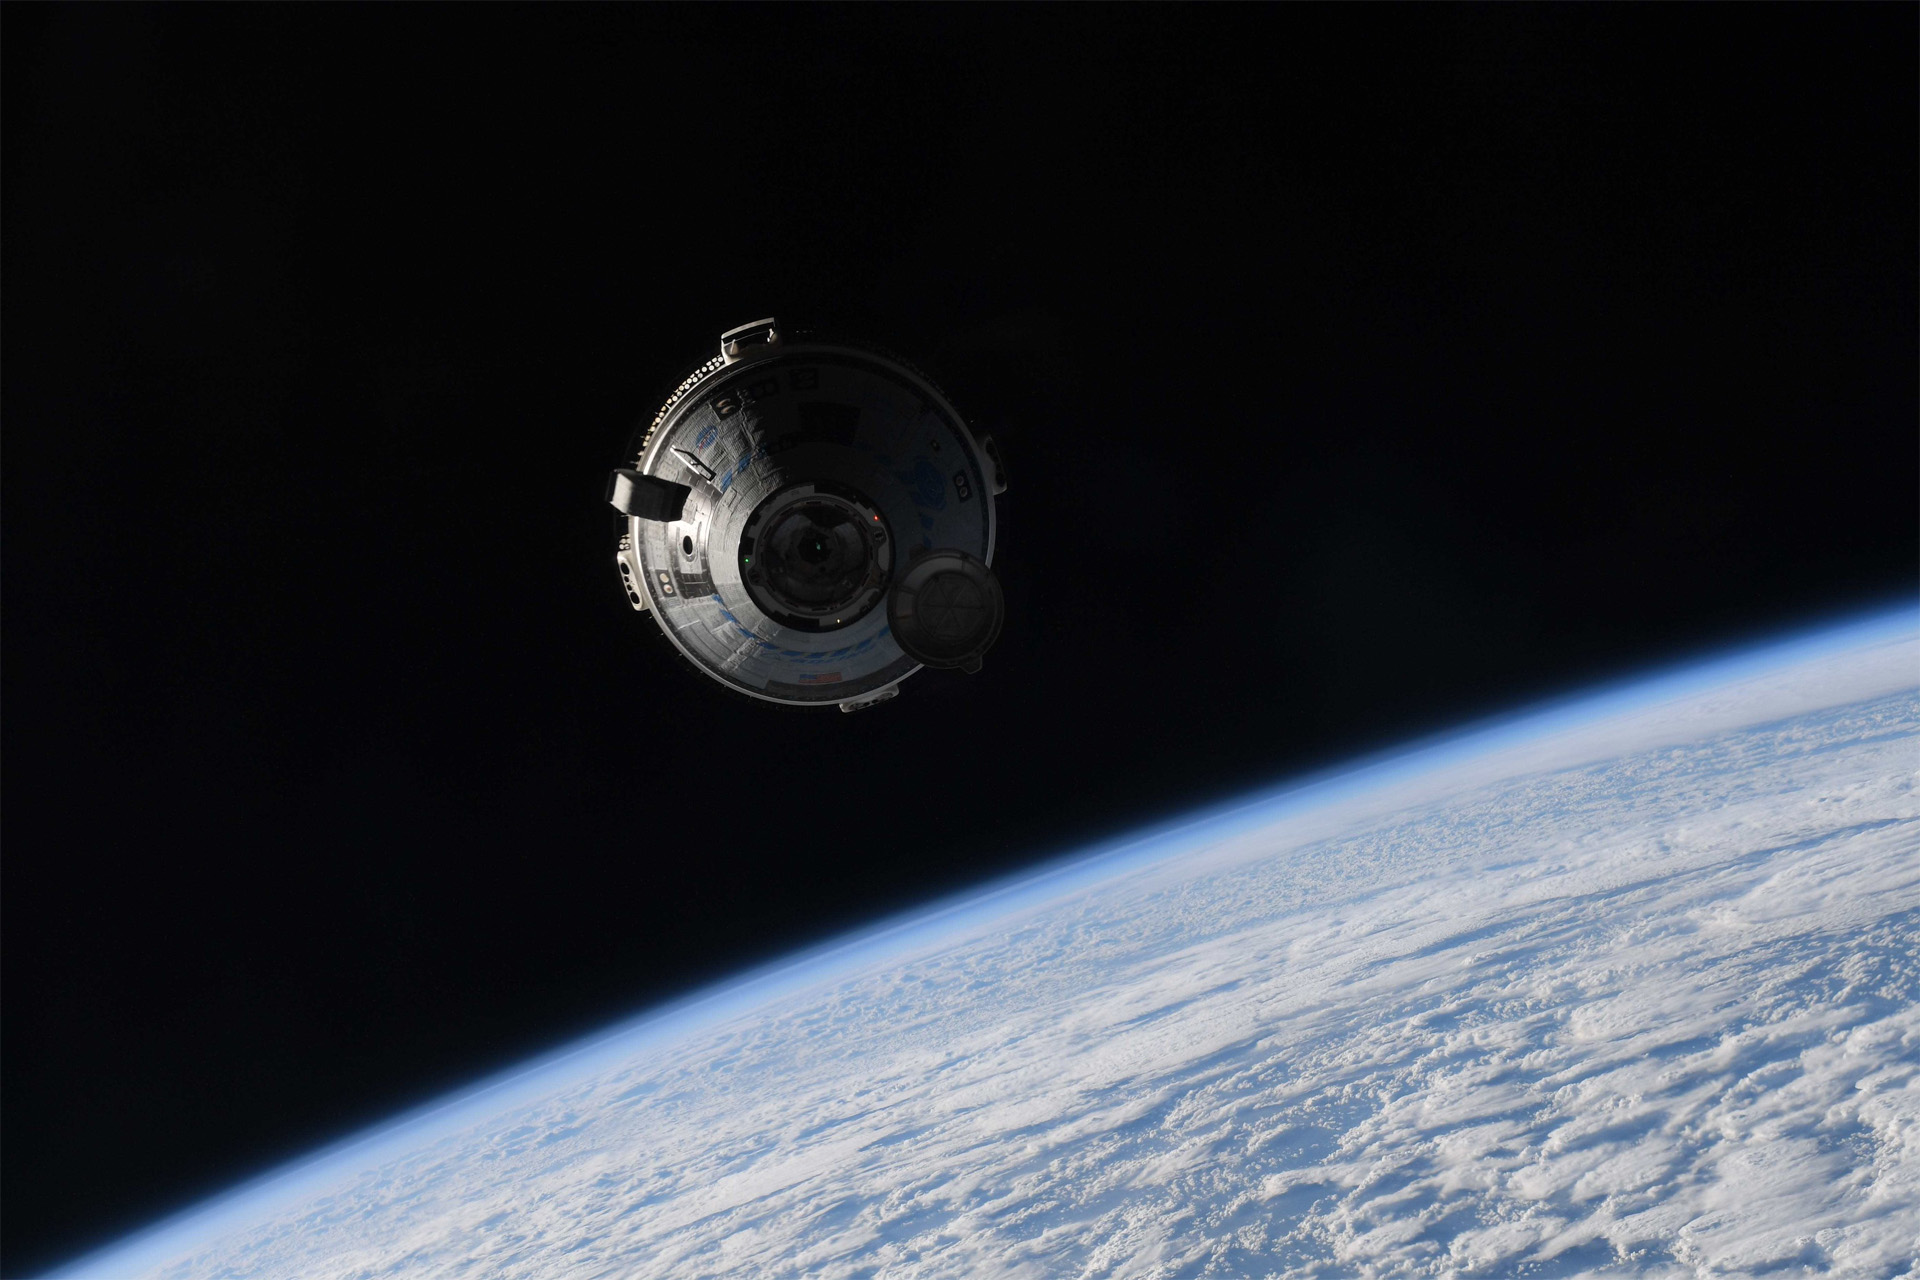  Boeing's 1st Starliner to visit space station looks spectacular in these astronaut photos 